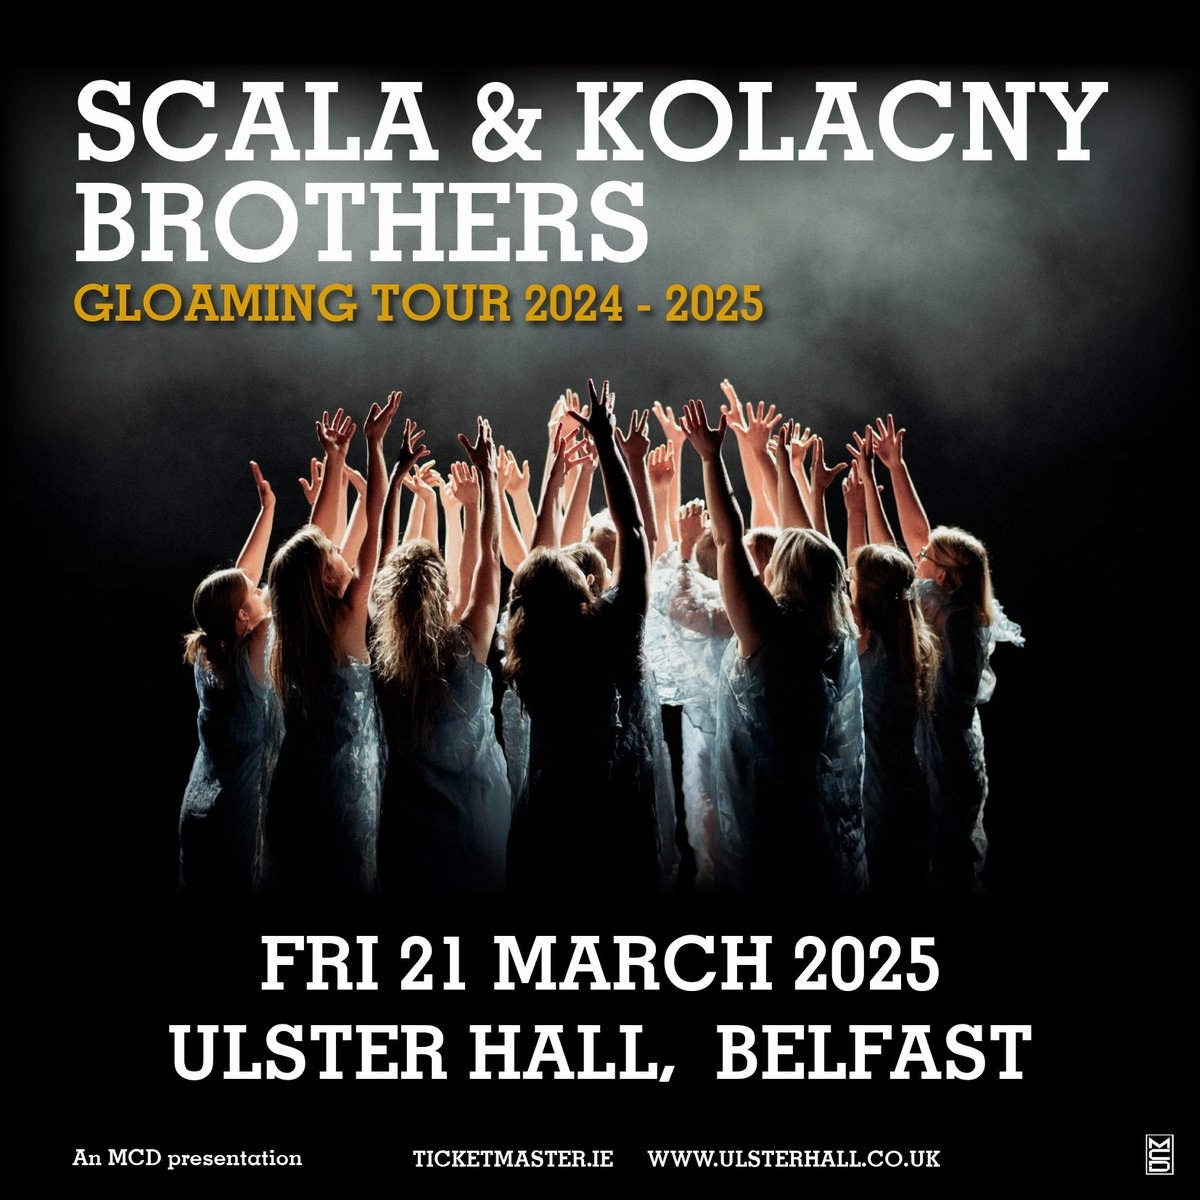 .@Scala_Kolacny Brothers have just added a Belfast date to their 2025 tour. They'll perform live at the iconic @Ulster_Hall on Friday 21 March 🙌 🎫 Tickets on sale this Friday at 10am bit.ly/3K7kRxG